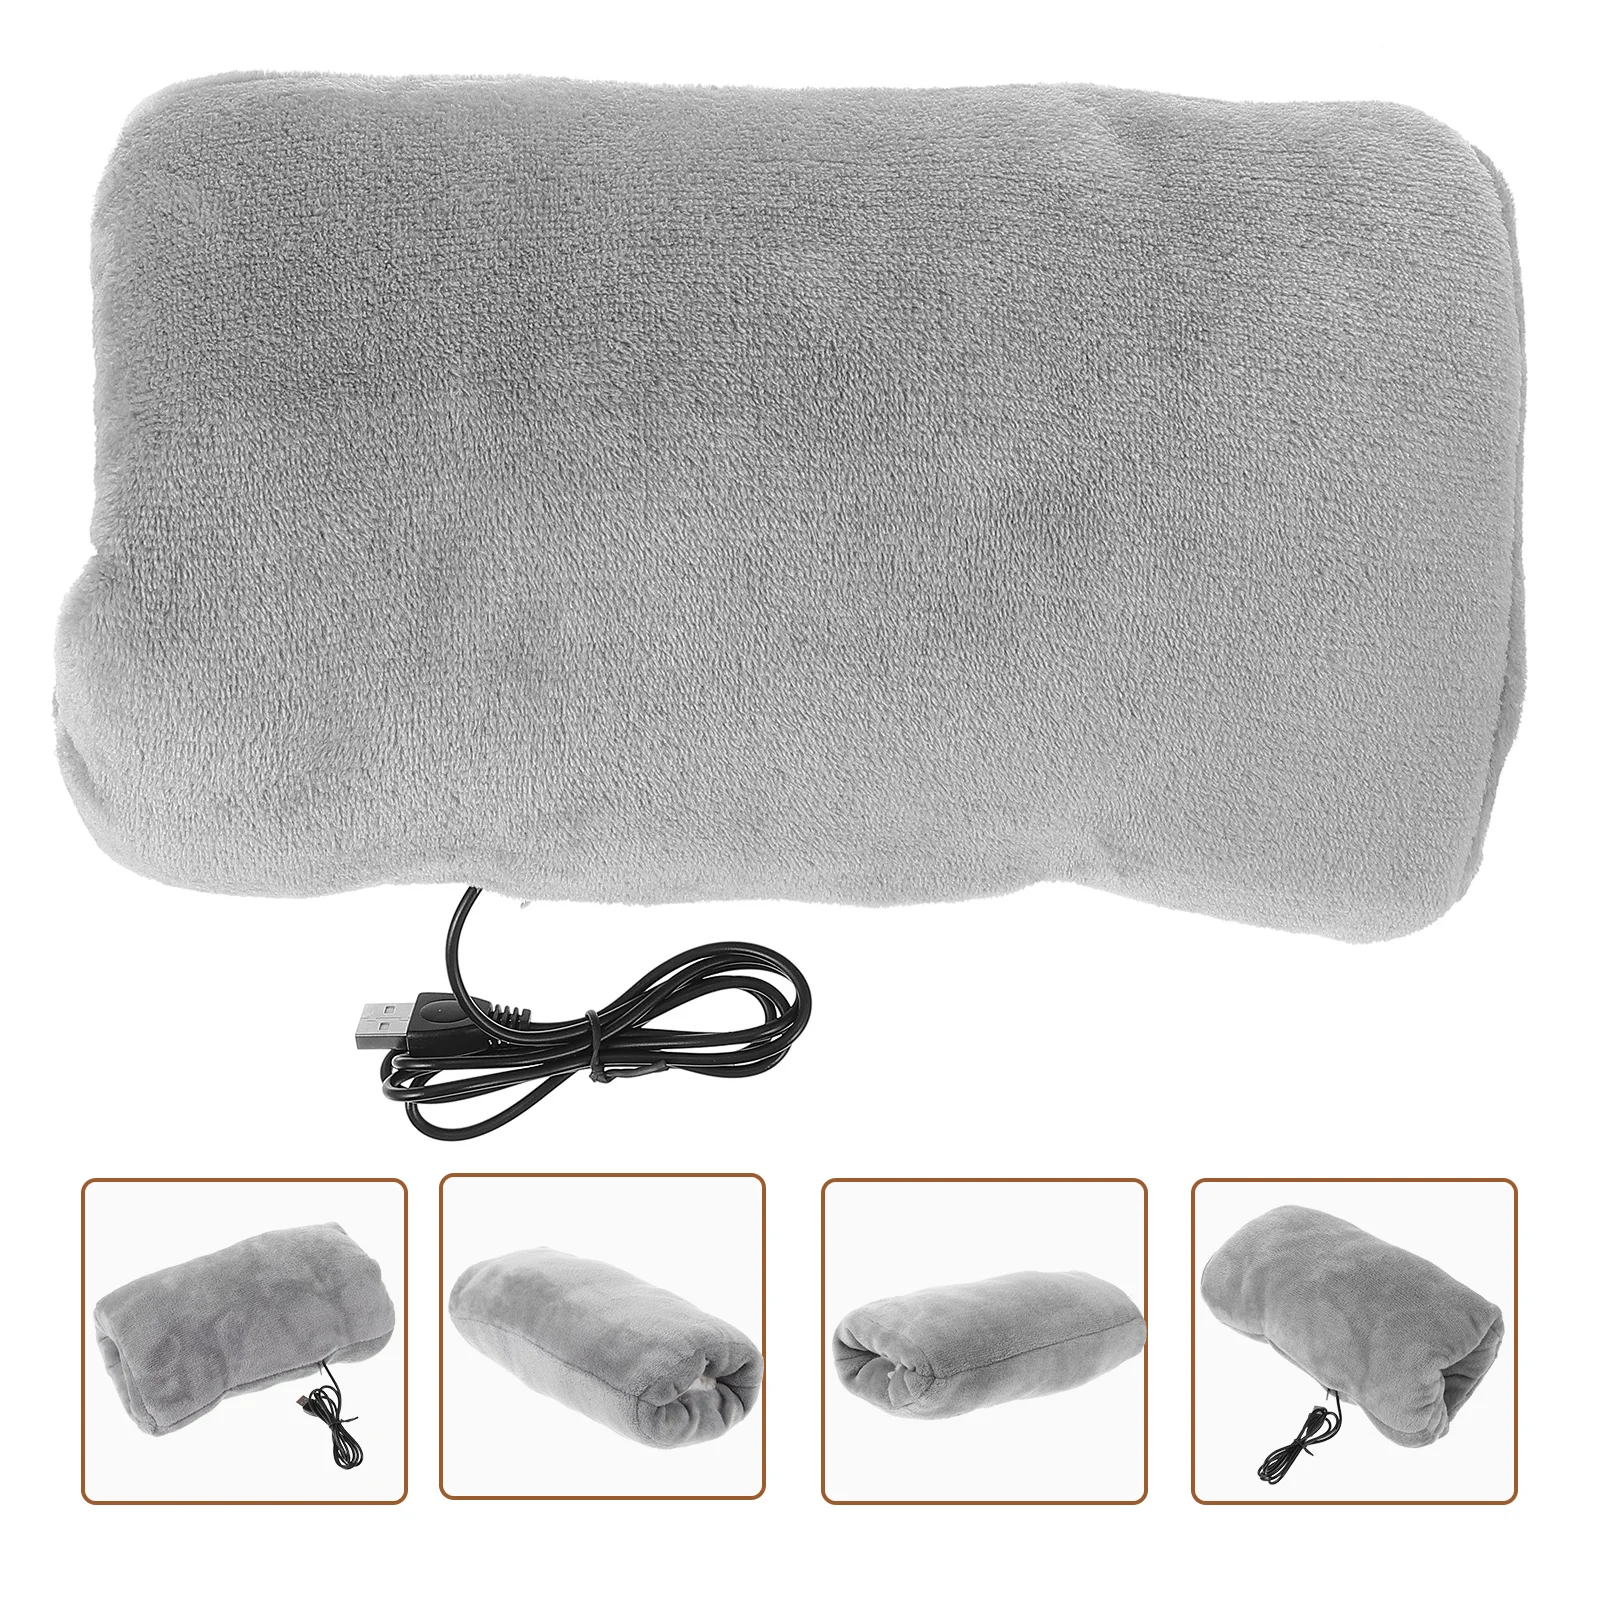 

Hand Warmer Pillow Plug-in Electric The Older USB Charging Warmers Rechargeable Winter Hands Heating Gloves Thick Flannel Girl